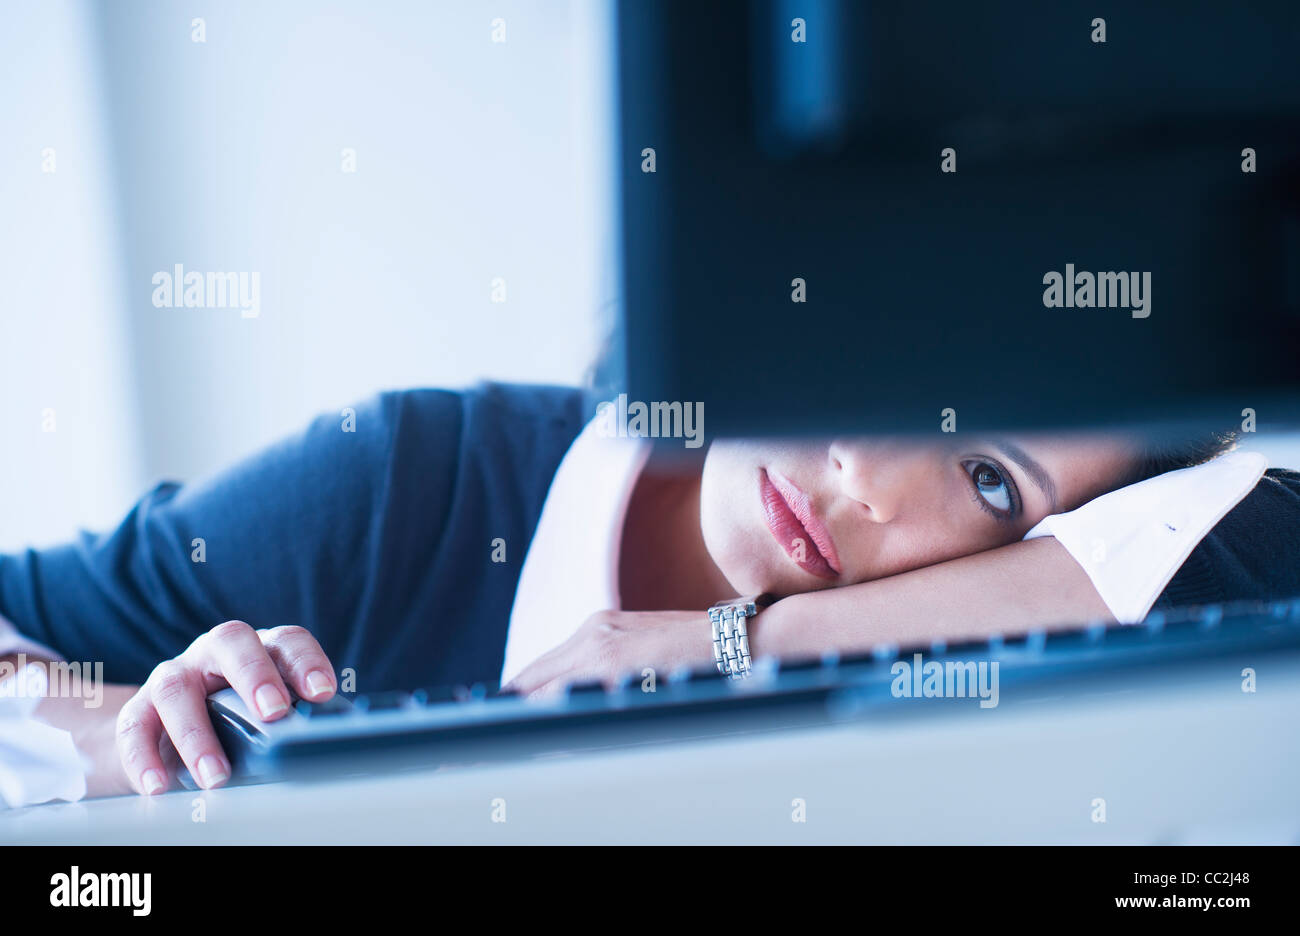 USA, New Jersey, Jersey City, Businesswoman looking tired in front of computer Stock Photo